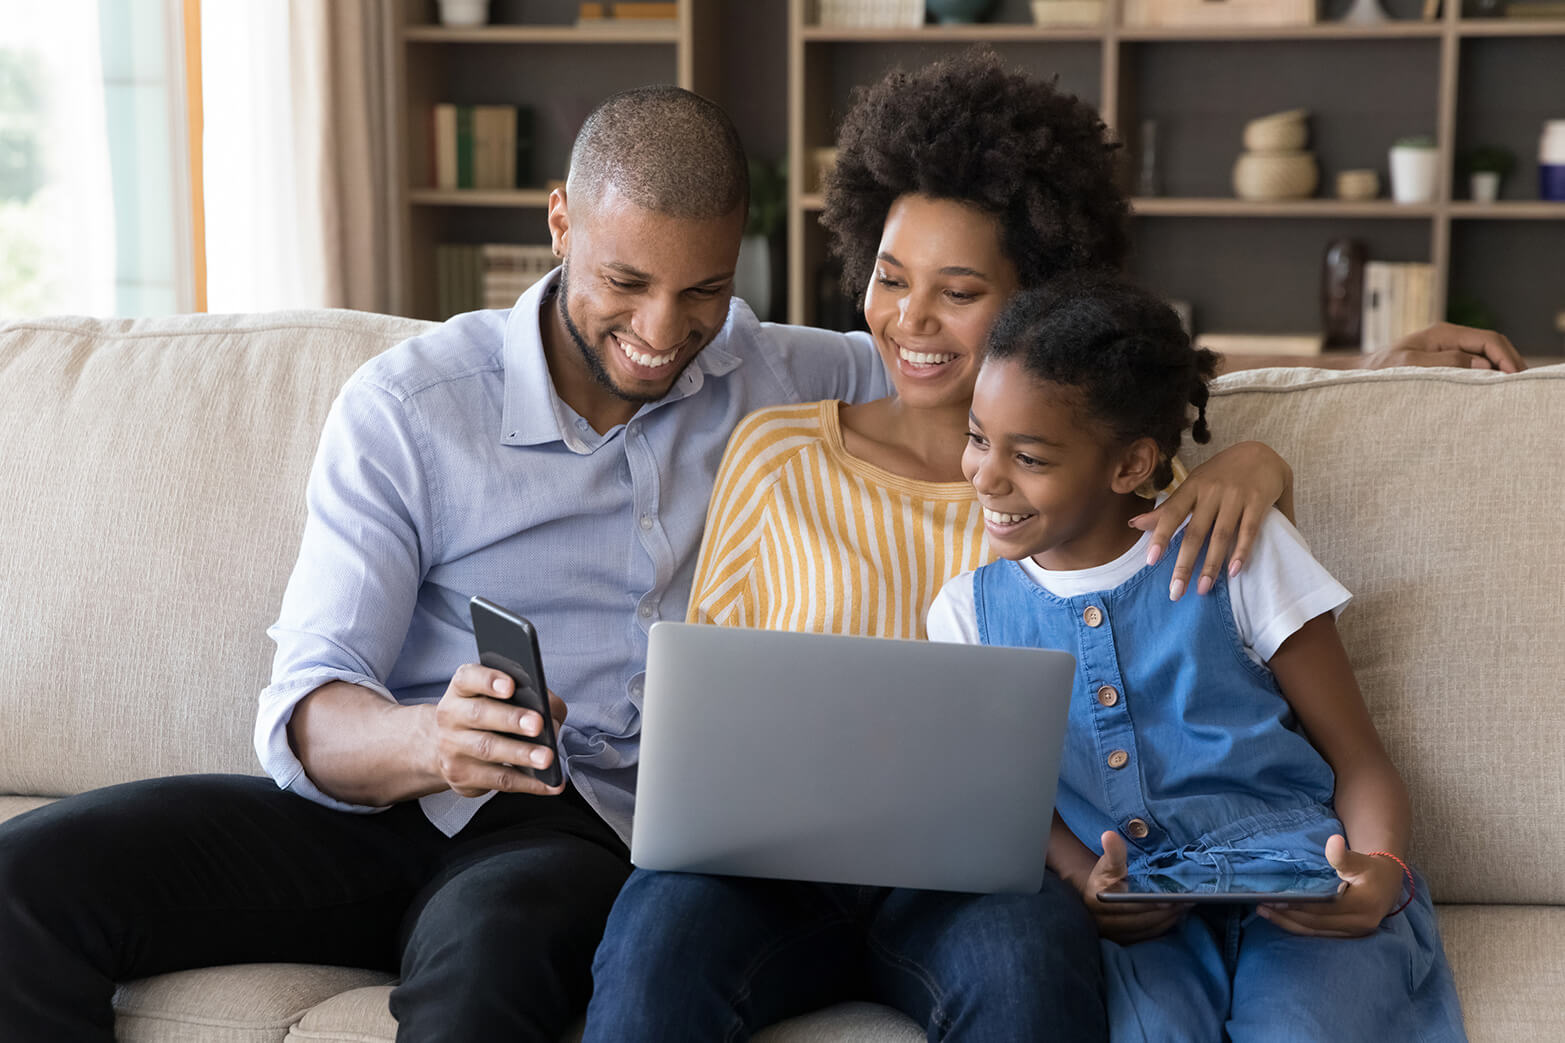 Happy African American parents and daughter resting on couch together watching online content on a laptop and mobile phone.